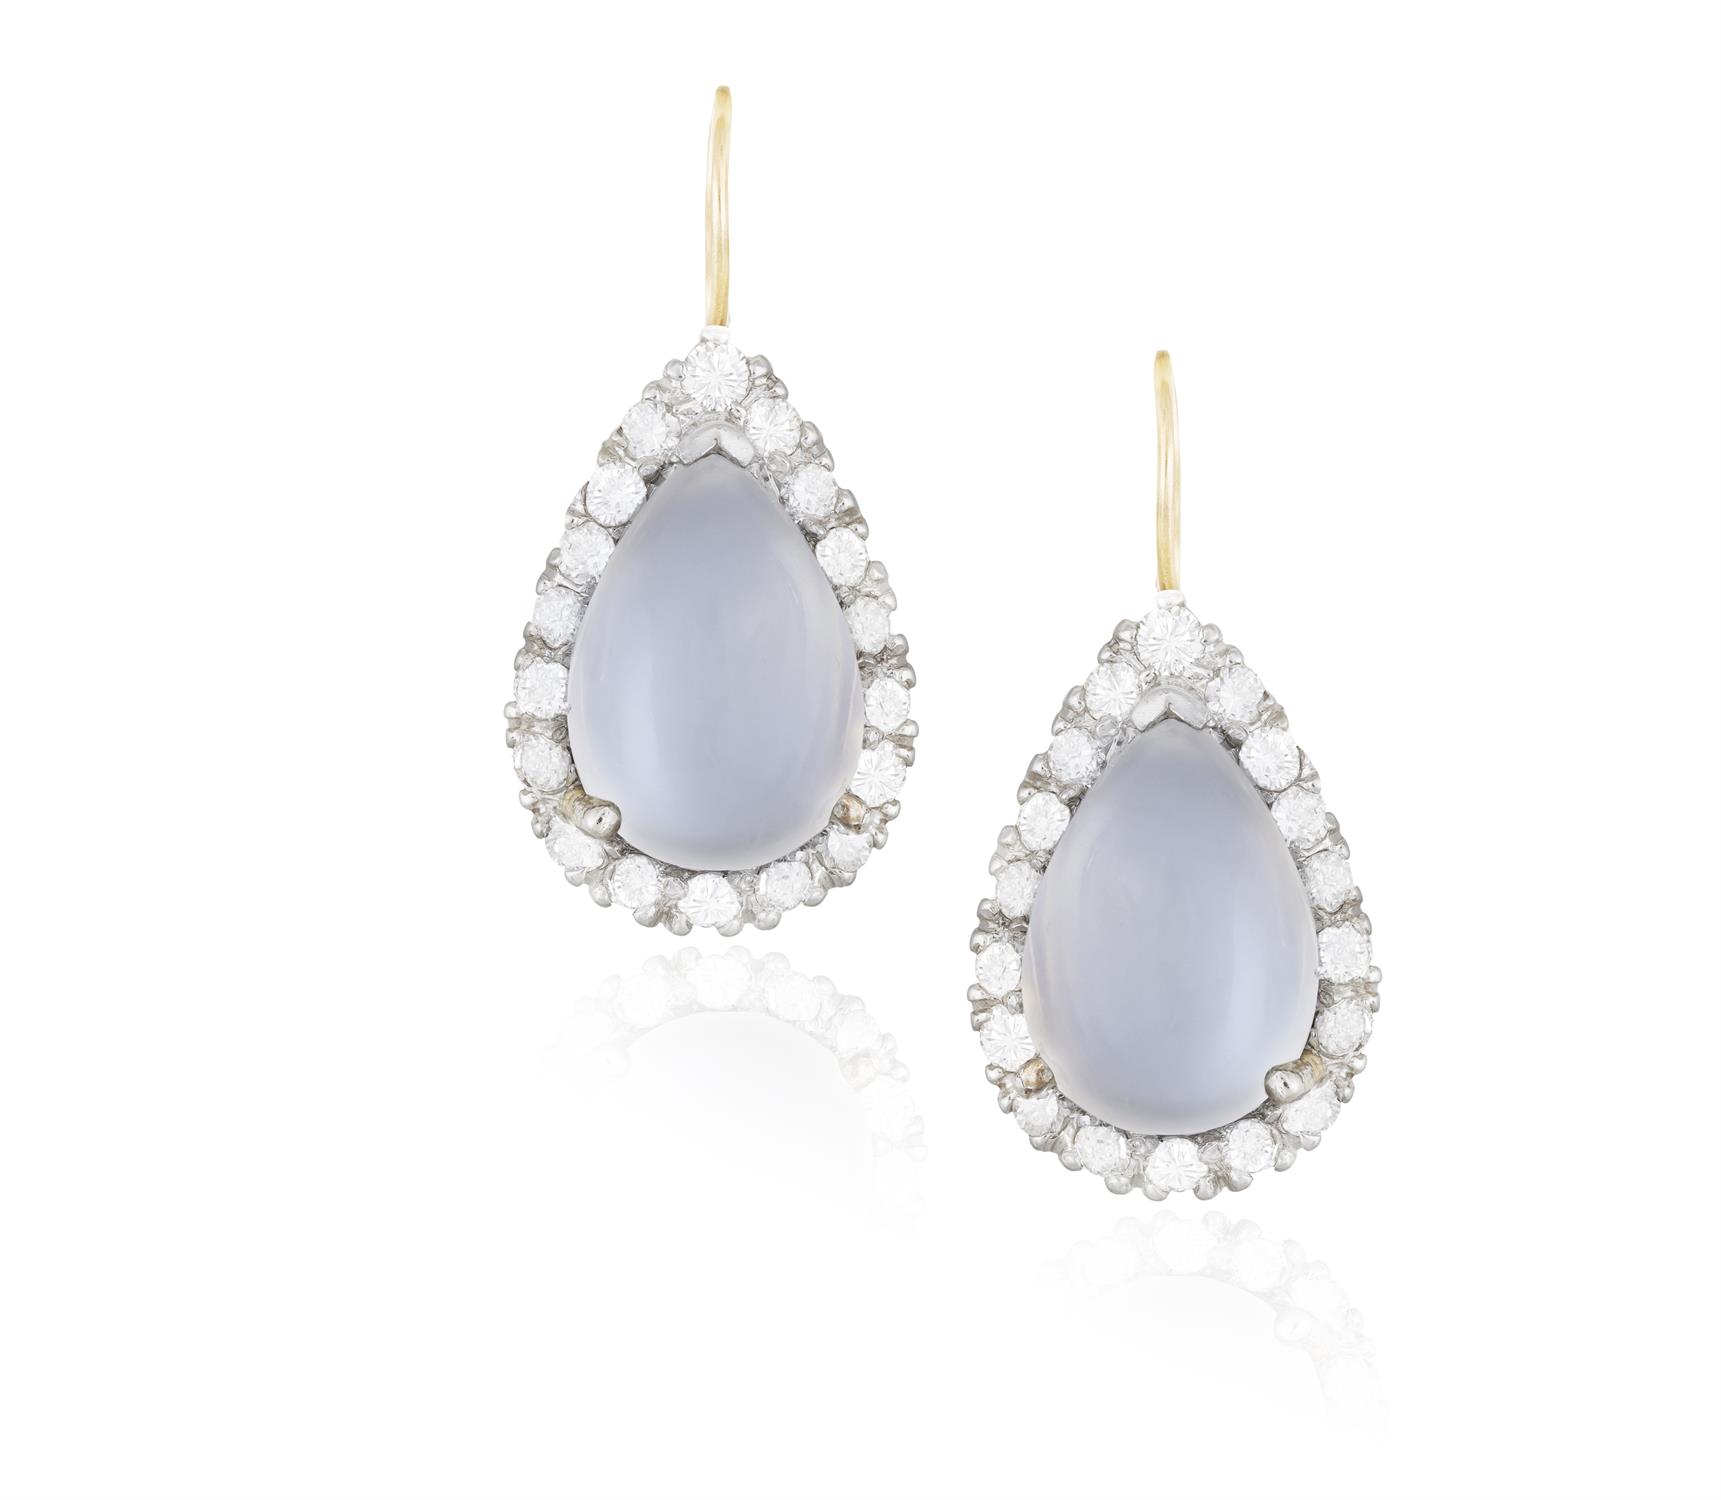 A PAIR OF MOONSTONE AND DIAMOND PENDENT EARRINGS Each composed of a pear-shaped cabochon